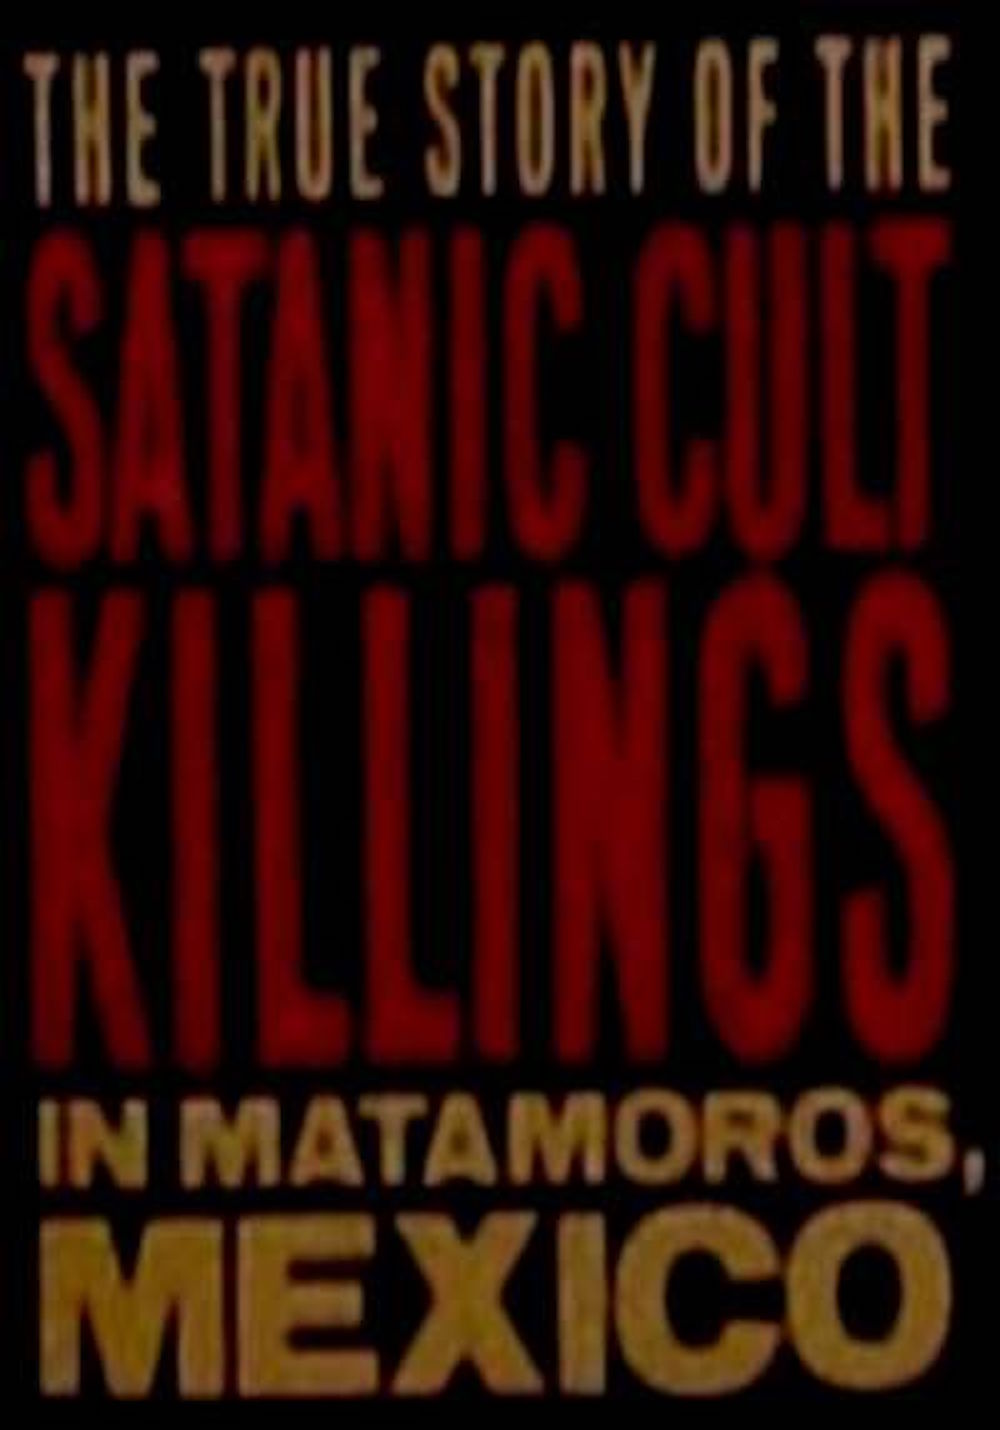 Rituales de Sangre: The True Story Behind the Matamoros Cult Killings (2008) starring George Gavito on DVD on DVD